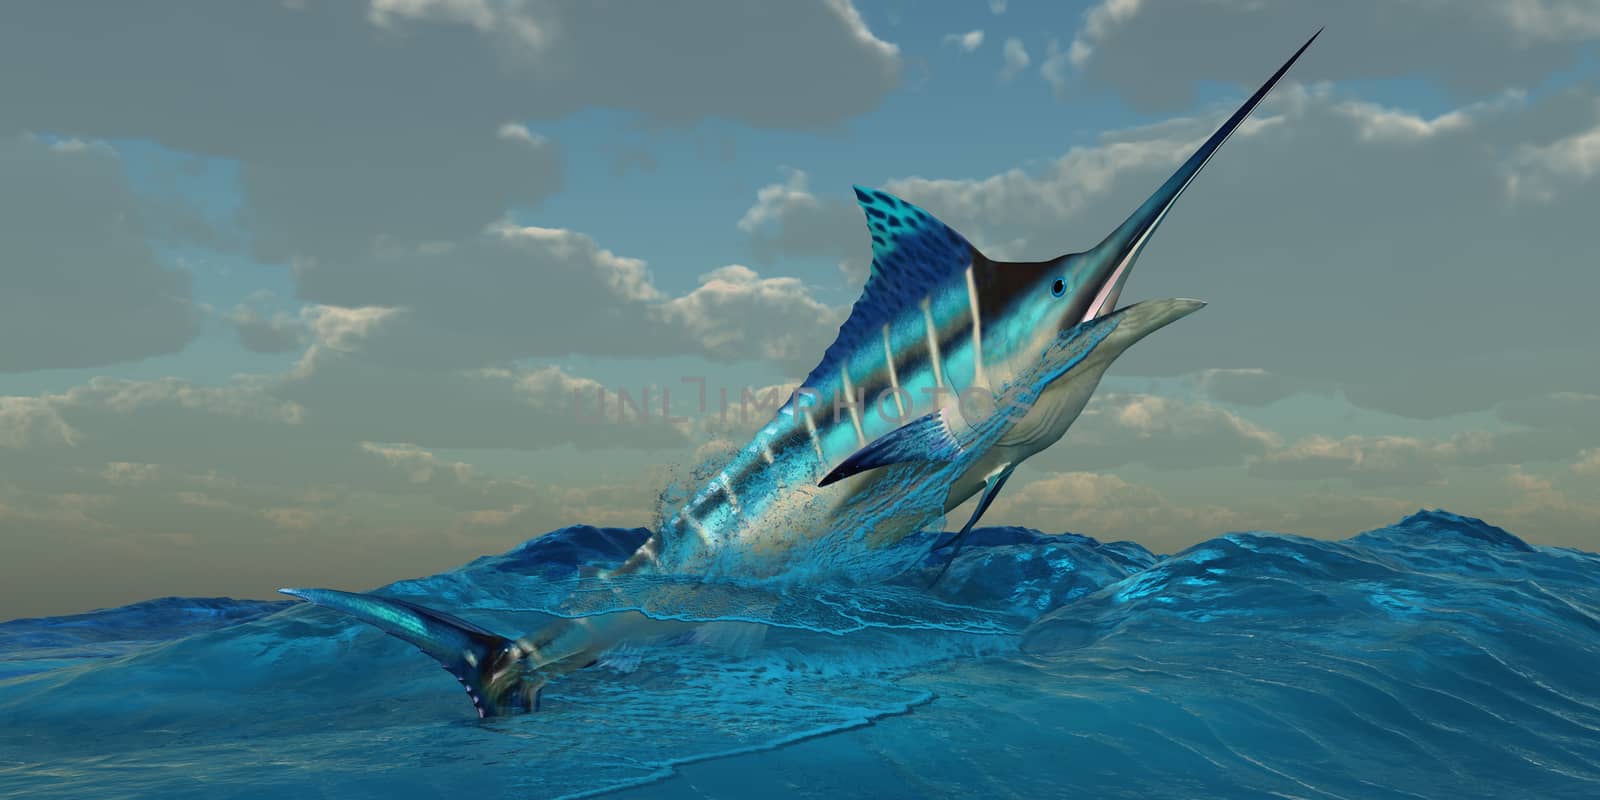 The Blue Marlin is a predator and is a favorite game fish with deep sea anglers.